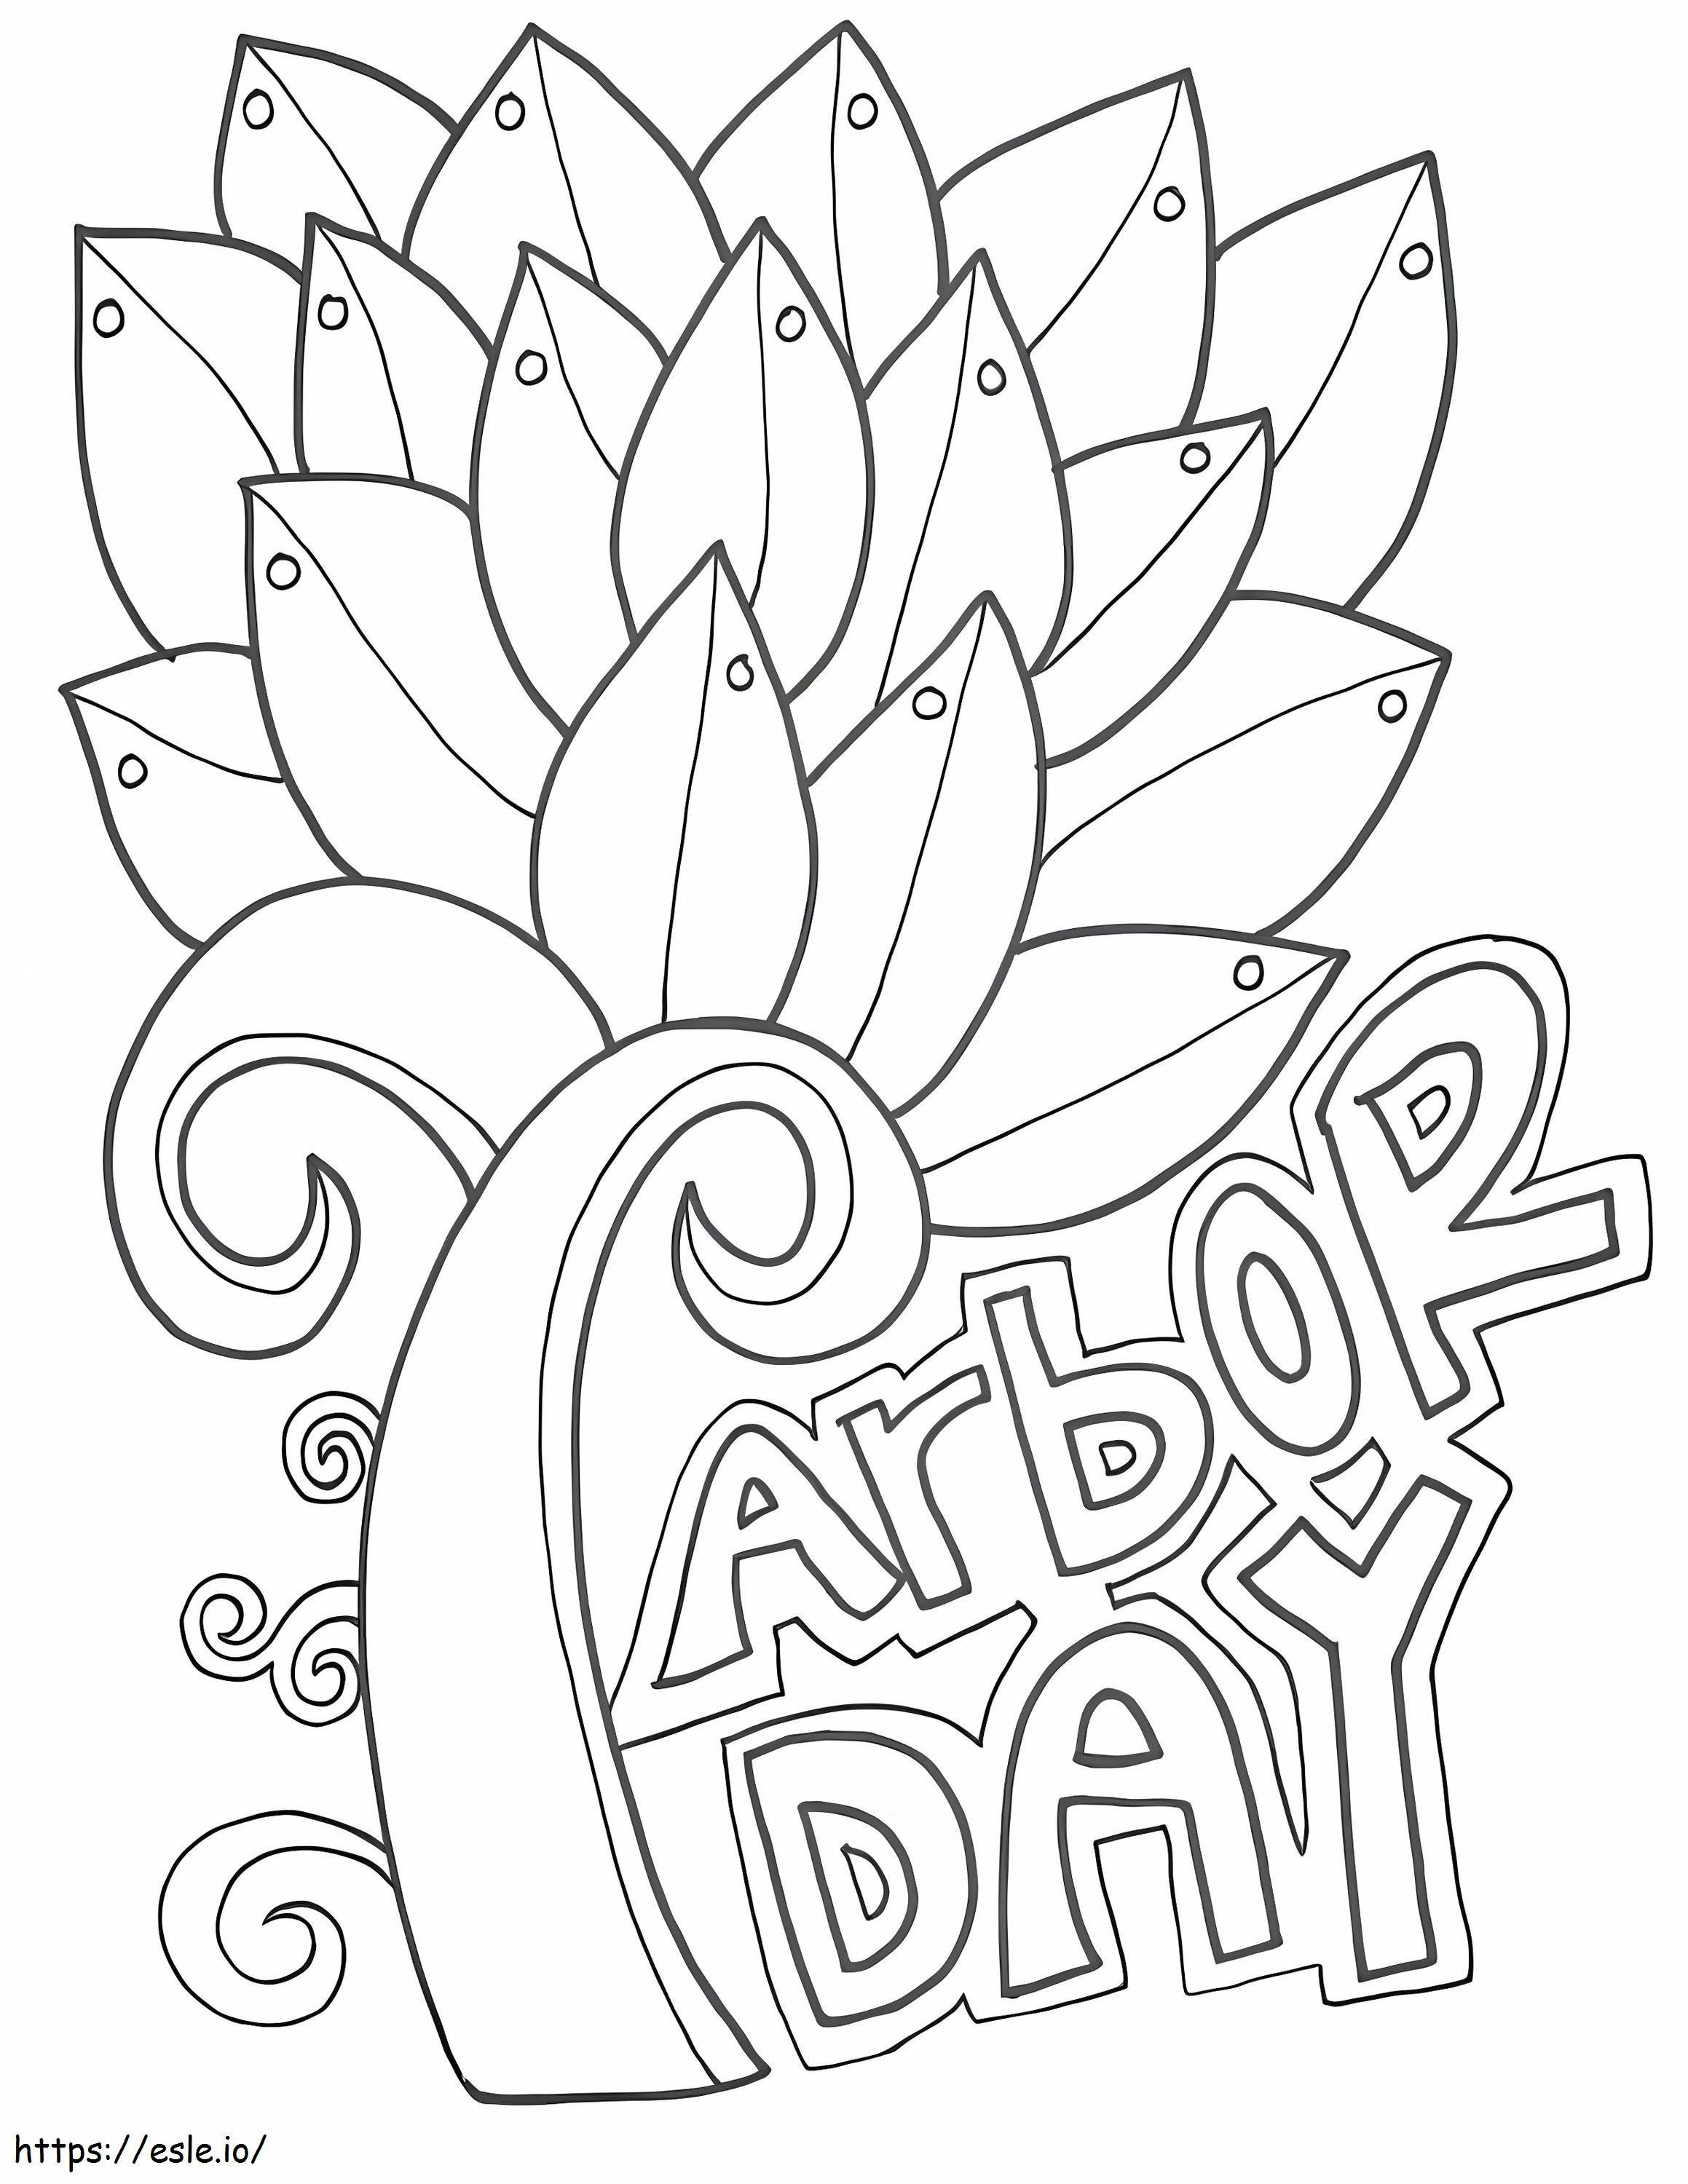 Arbor Day 4 coloring page